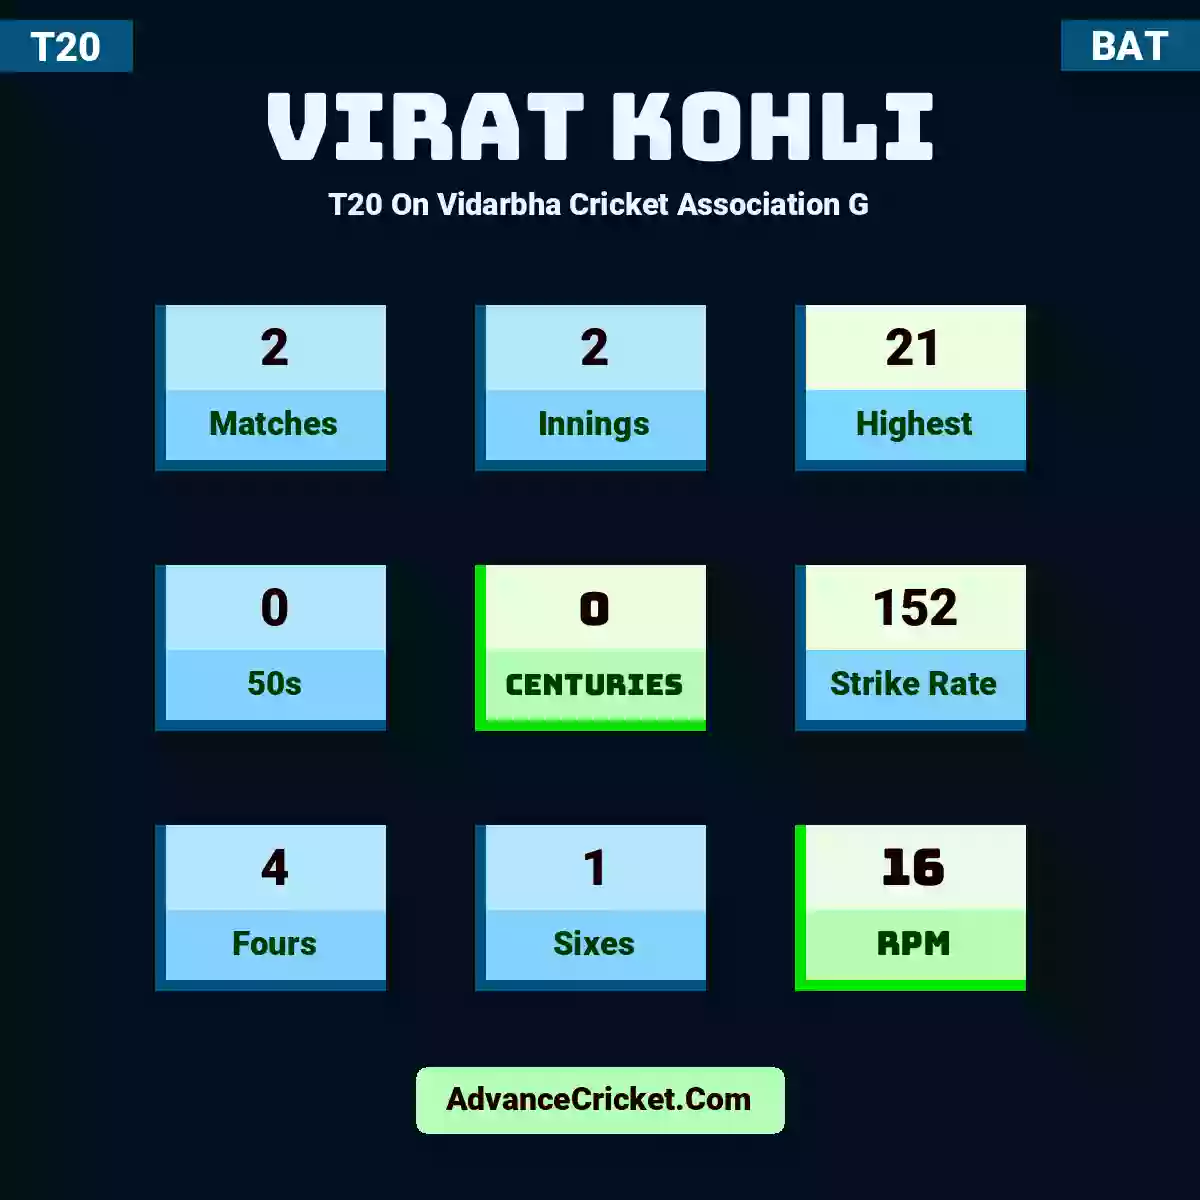 Virat Kohli T20  On Vidarbha Cricket Association G, Virat Kohli played 2 matches, scored 21 runs as highest, 0 half-centuries, and 0 centuries, with a strike rate of 152. V.Kohli hit 4 fours and 1 sixes, with an RPM of 16.